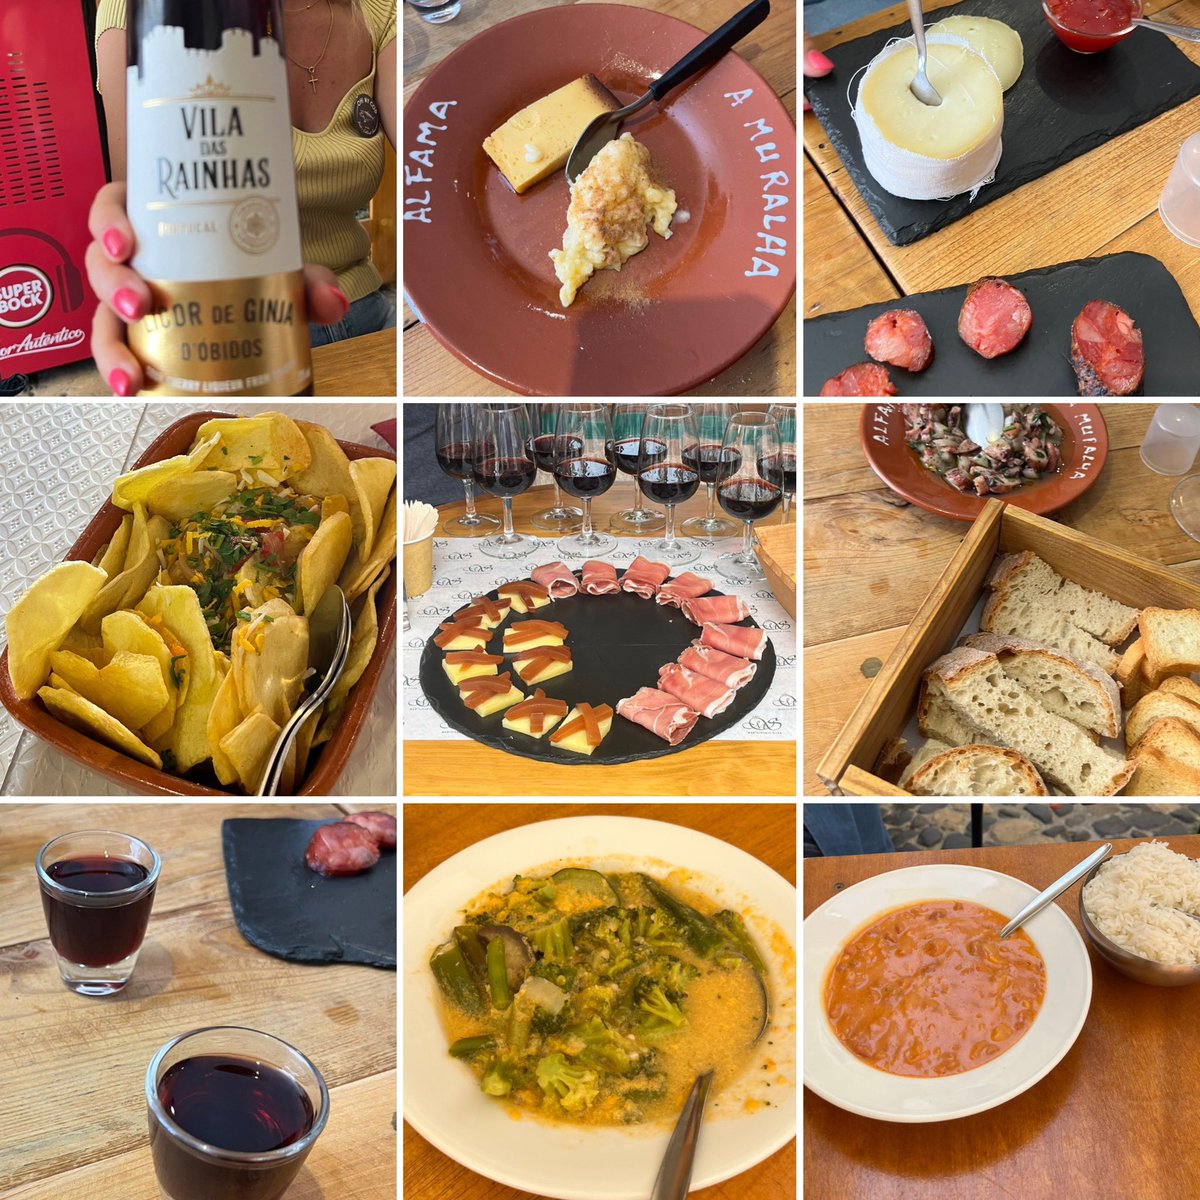 🥇For foodies going to #Lisbon- 4hr tour of 3 districts with 17 tastings. Gems you’d never find on your own: ohmycodtours.com #sundayvibes